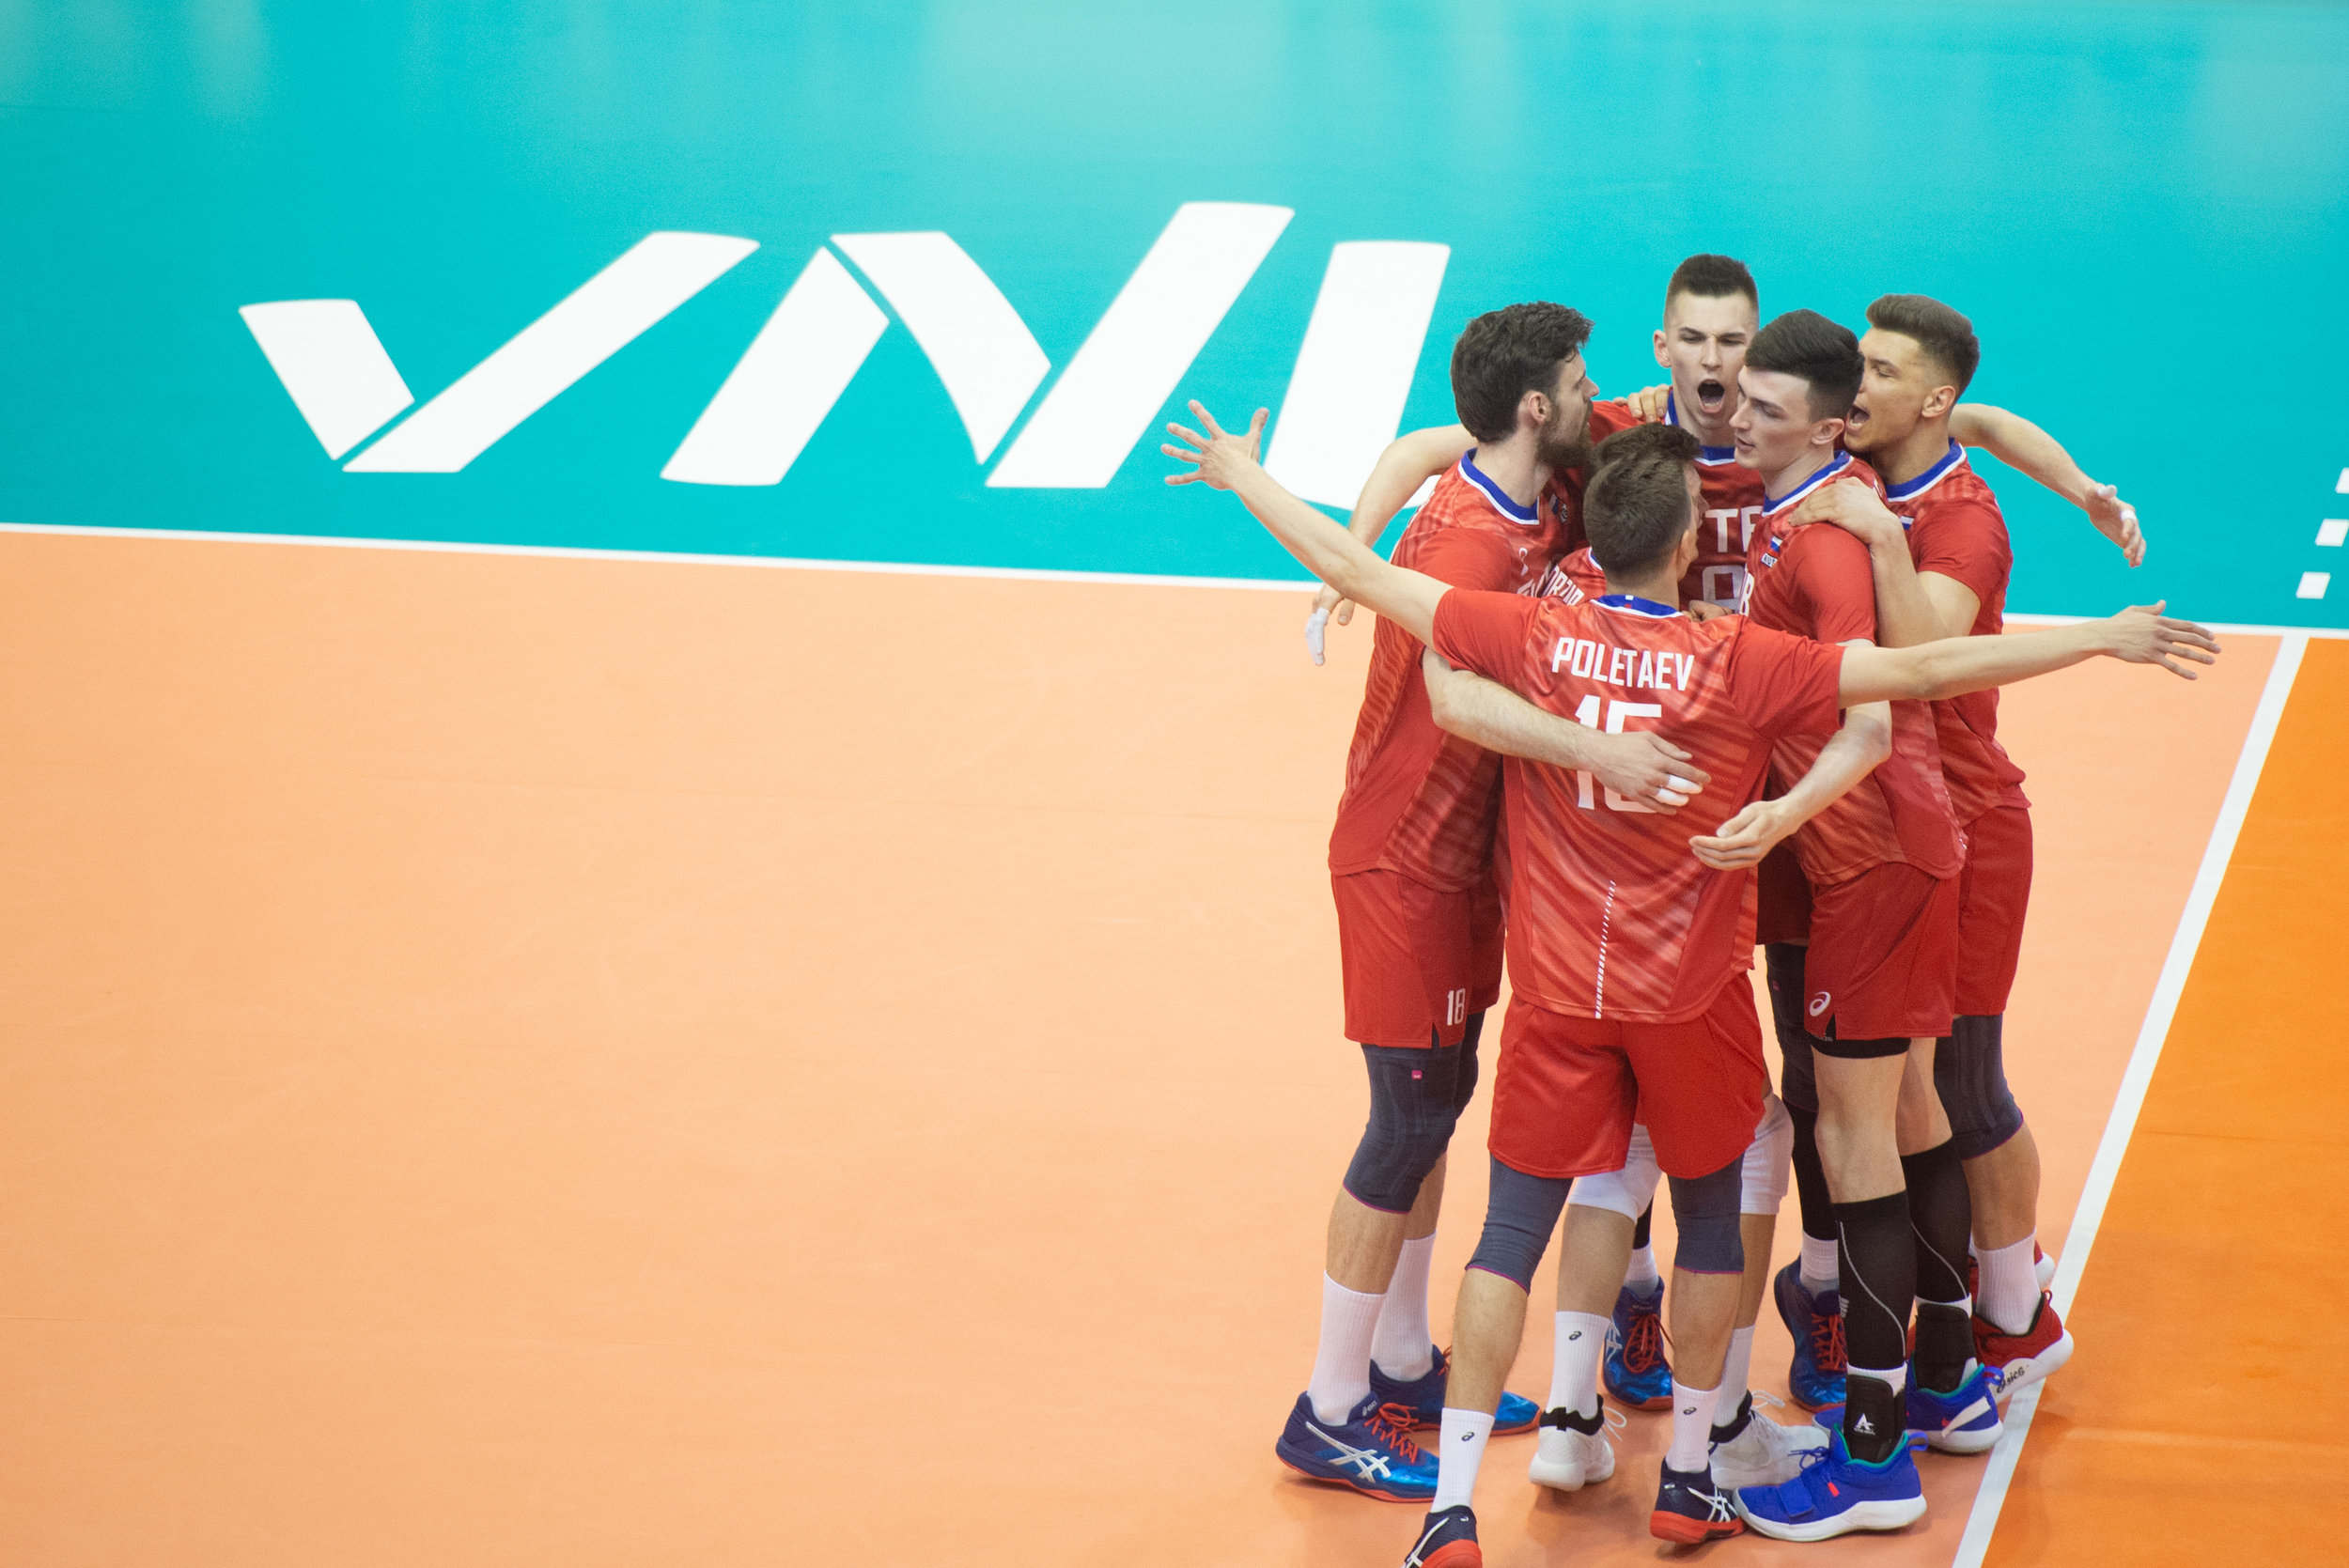 fivb live streaming